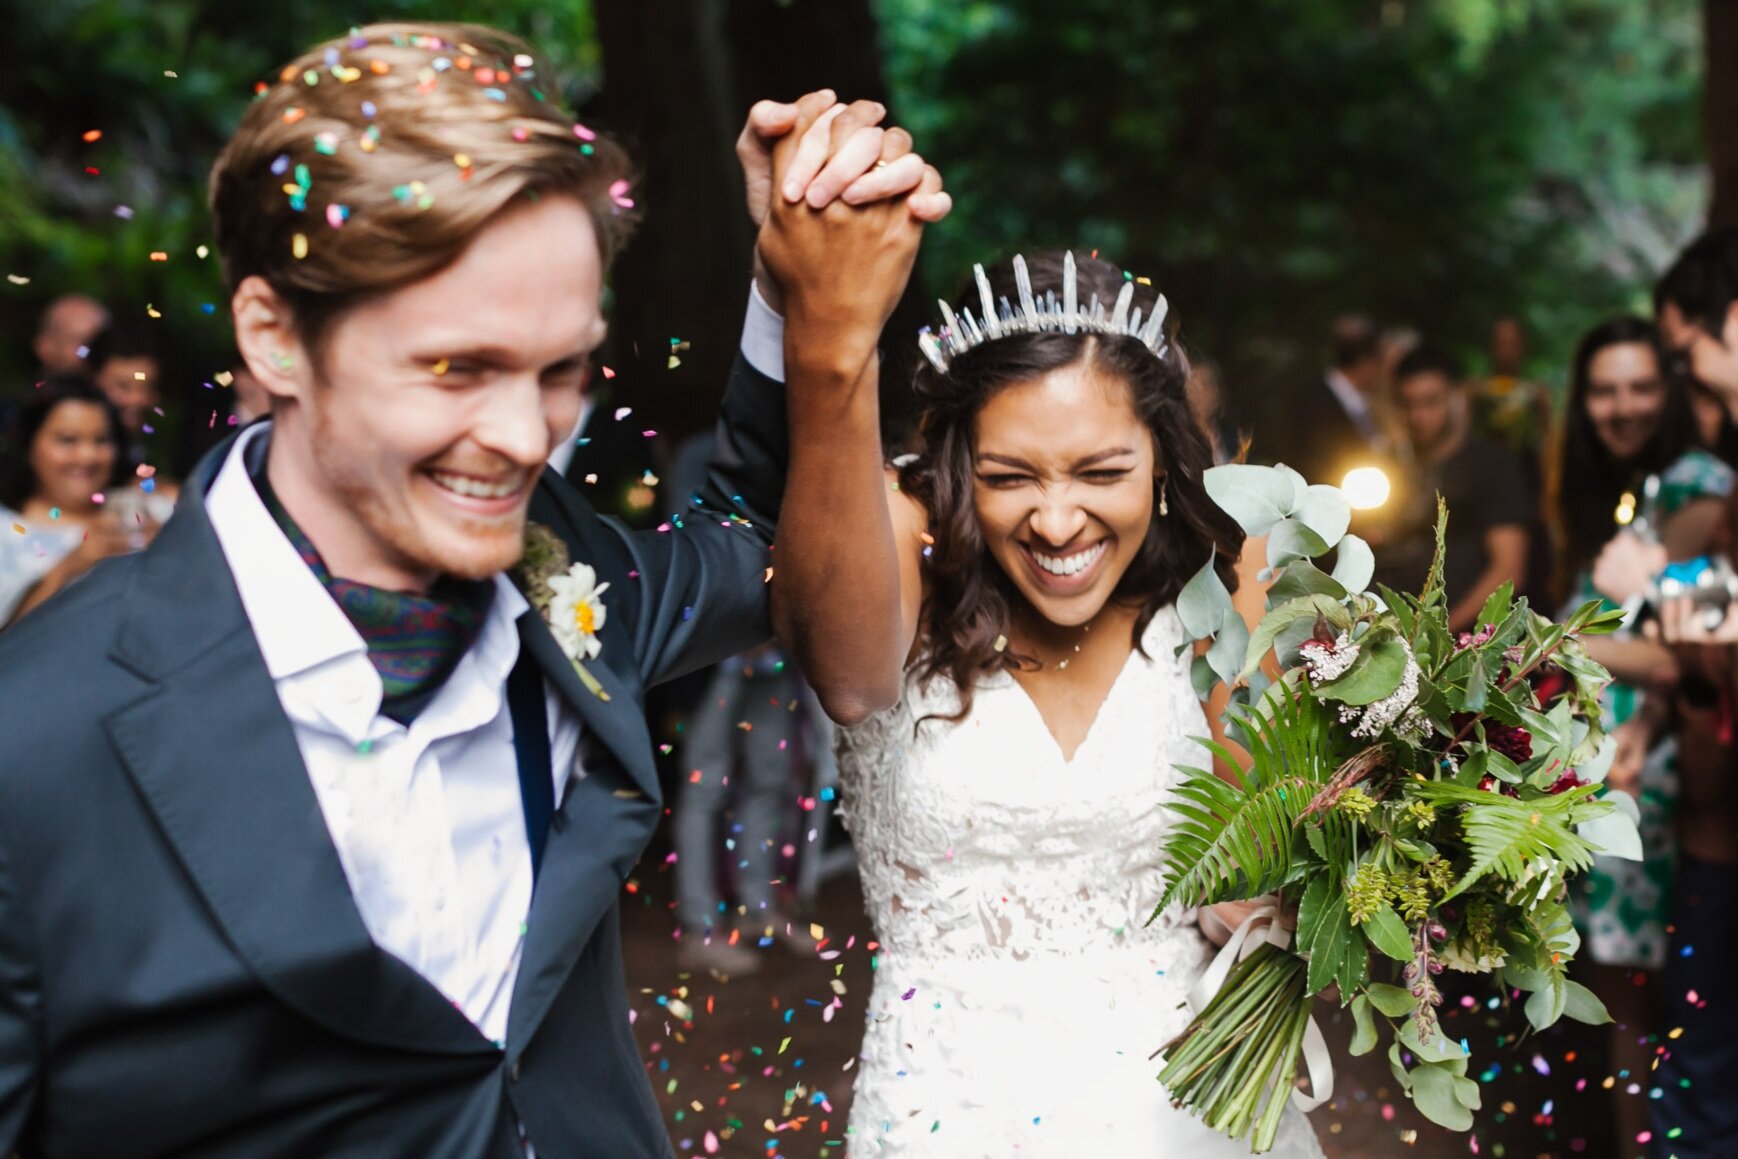 California farm wedding couple exit their ceremony with colorful confetti flying